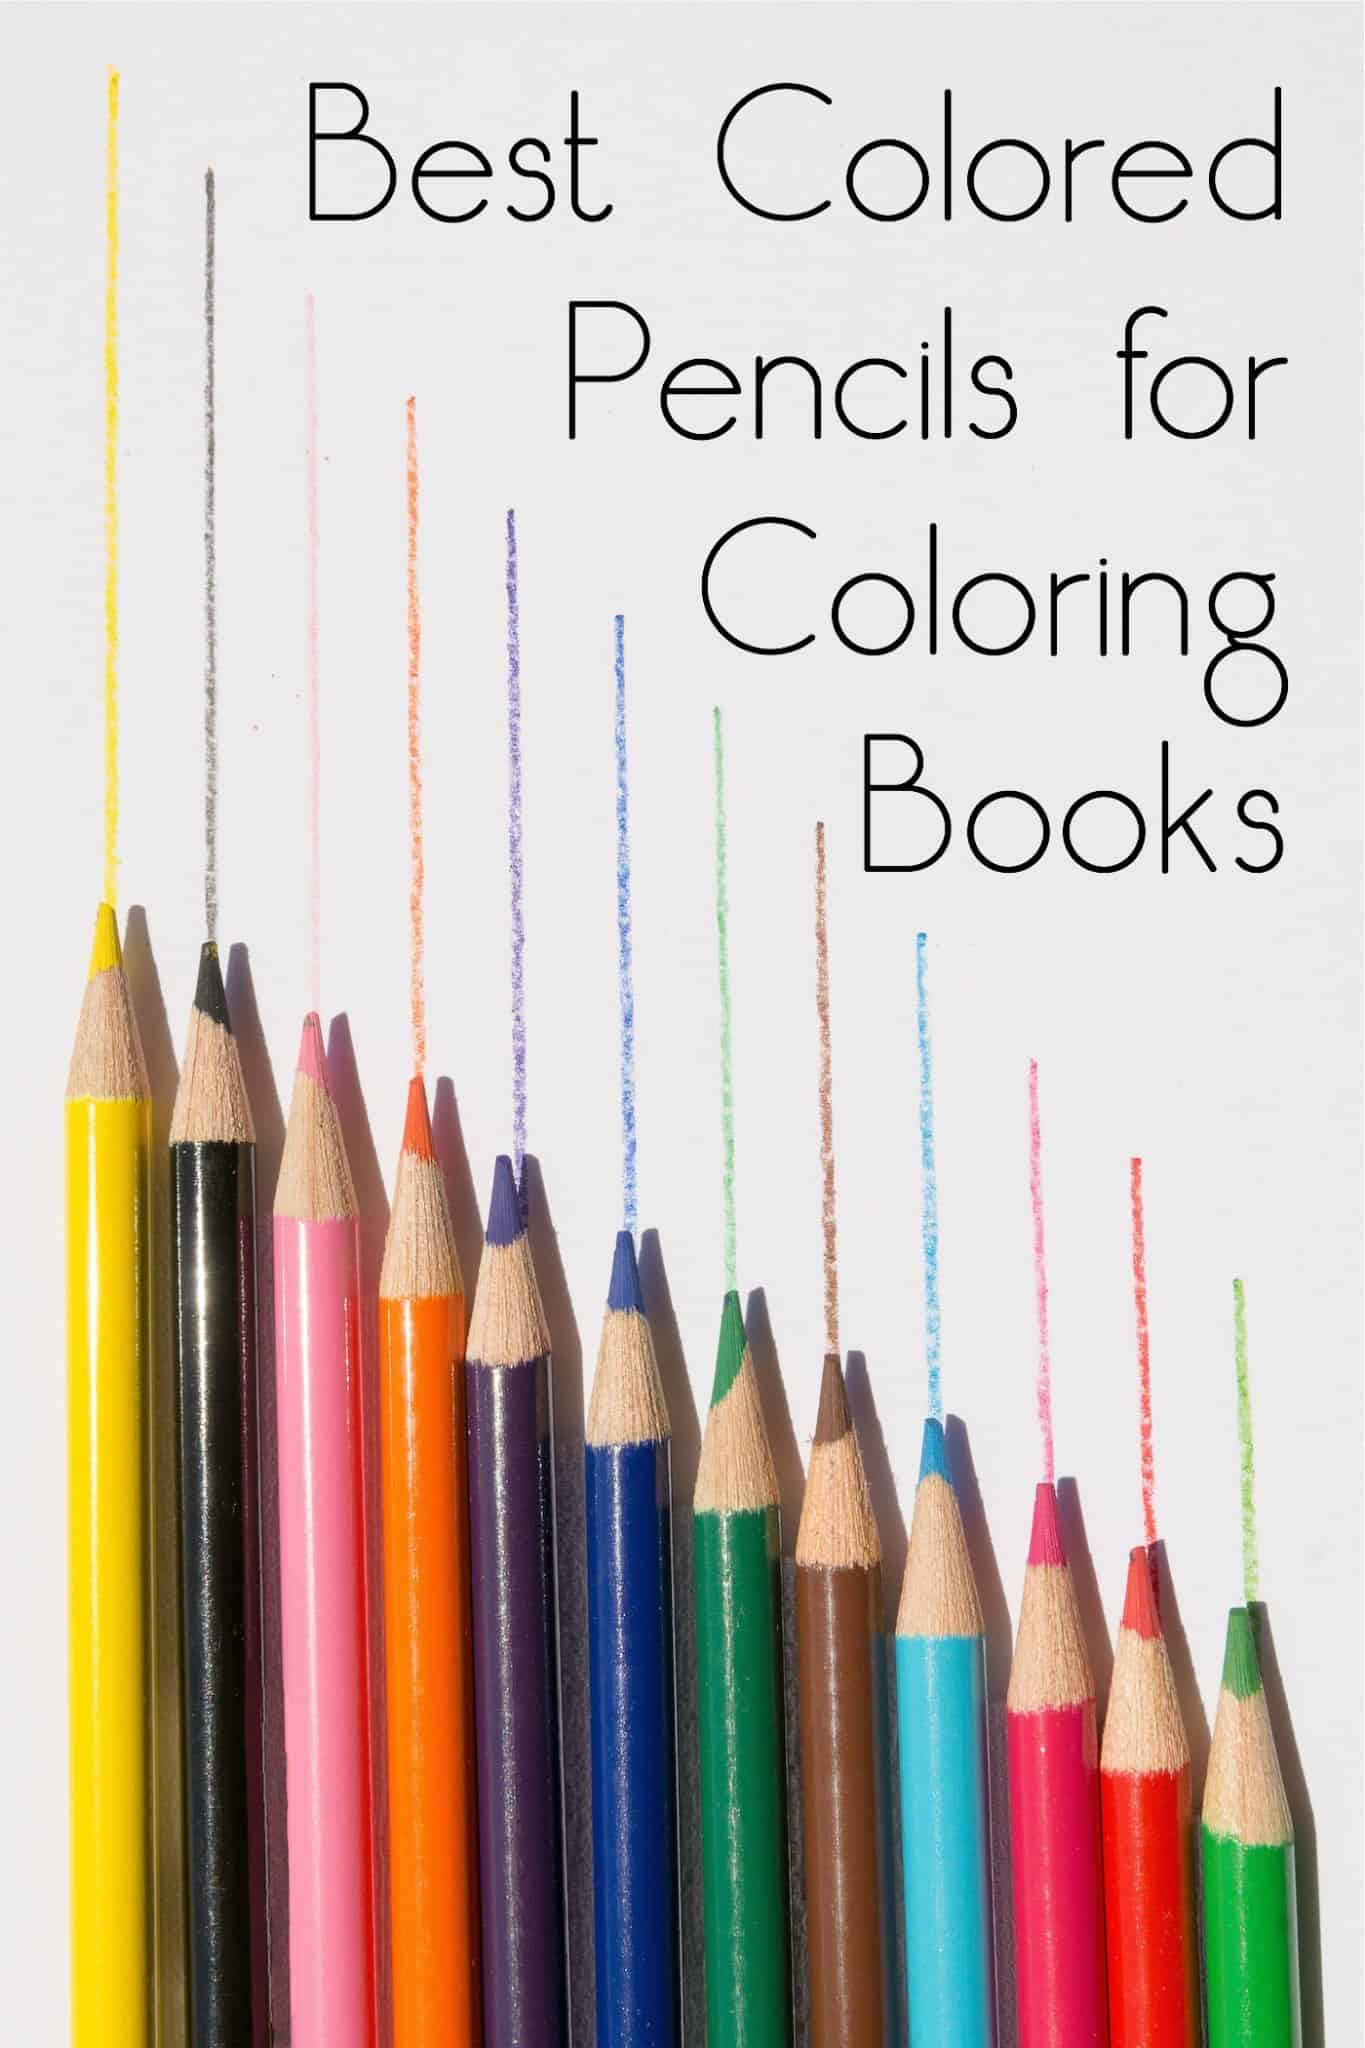 Coloring Pencils For Adult Coloring Books
 Best Colored Pencils for Coloring Books DIY Candy